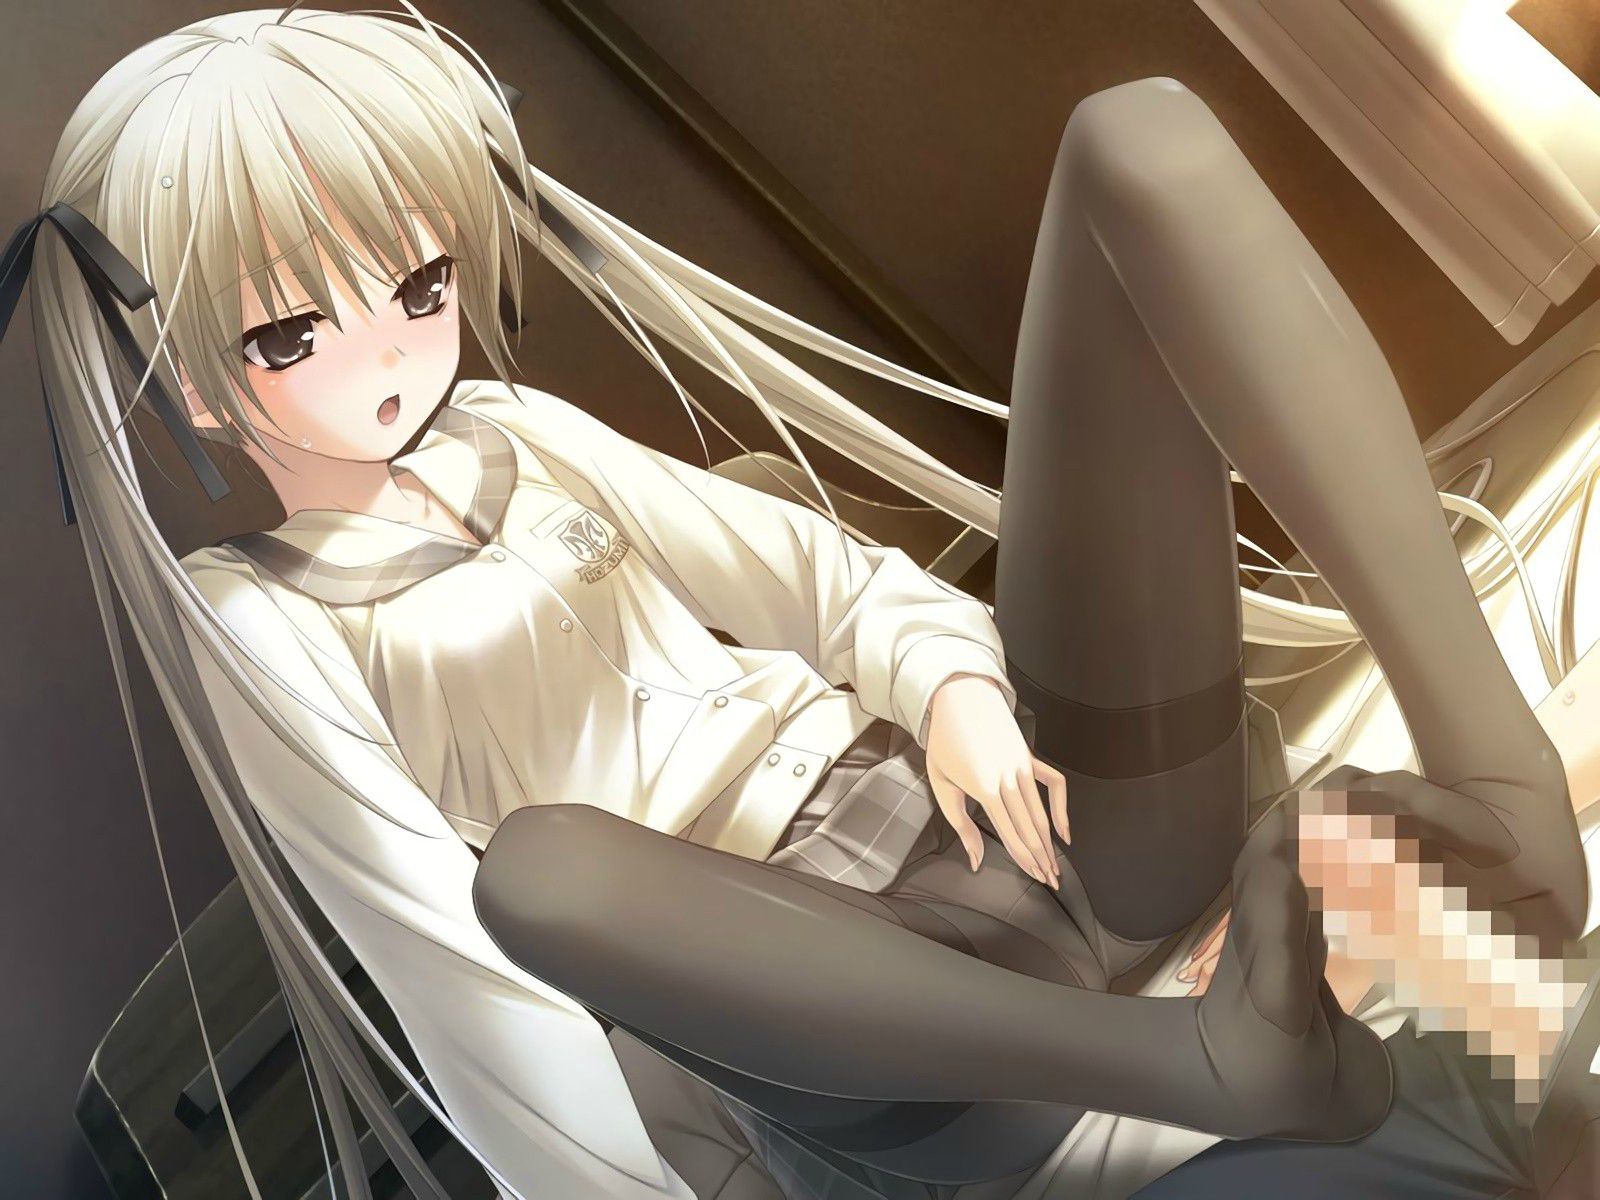 [Secondary erotic images] but it is cruelly good reason? Foot girl looking down on me even better jobs www 1